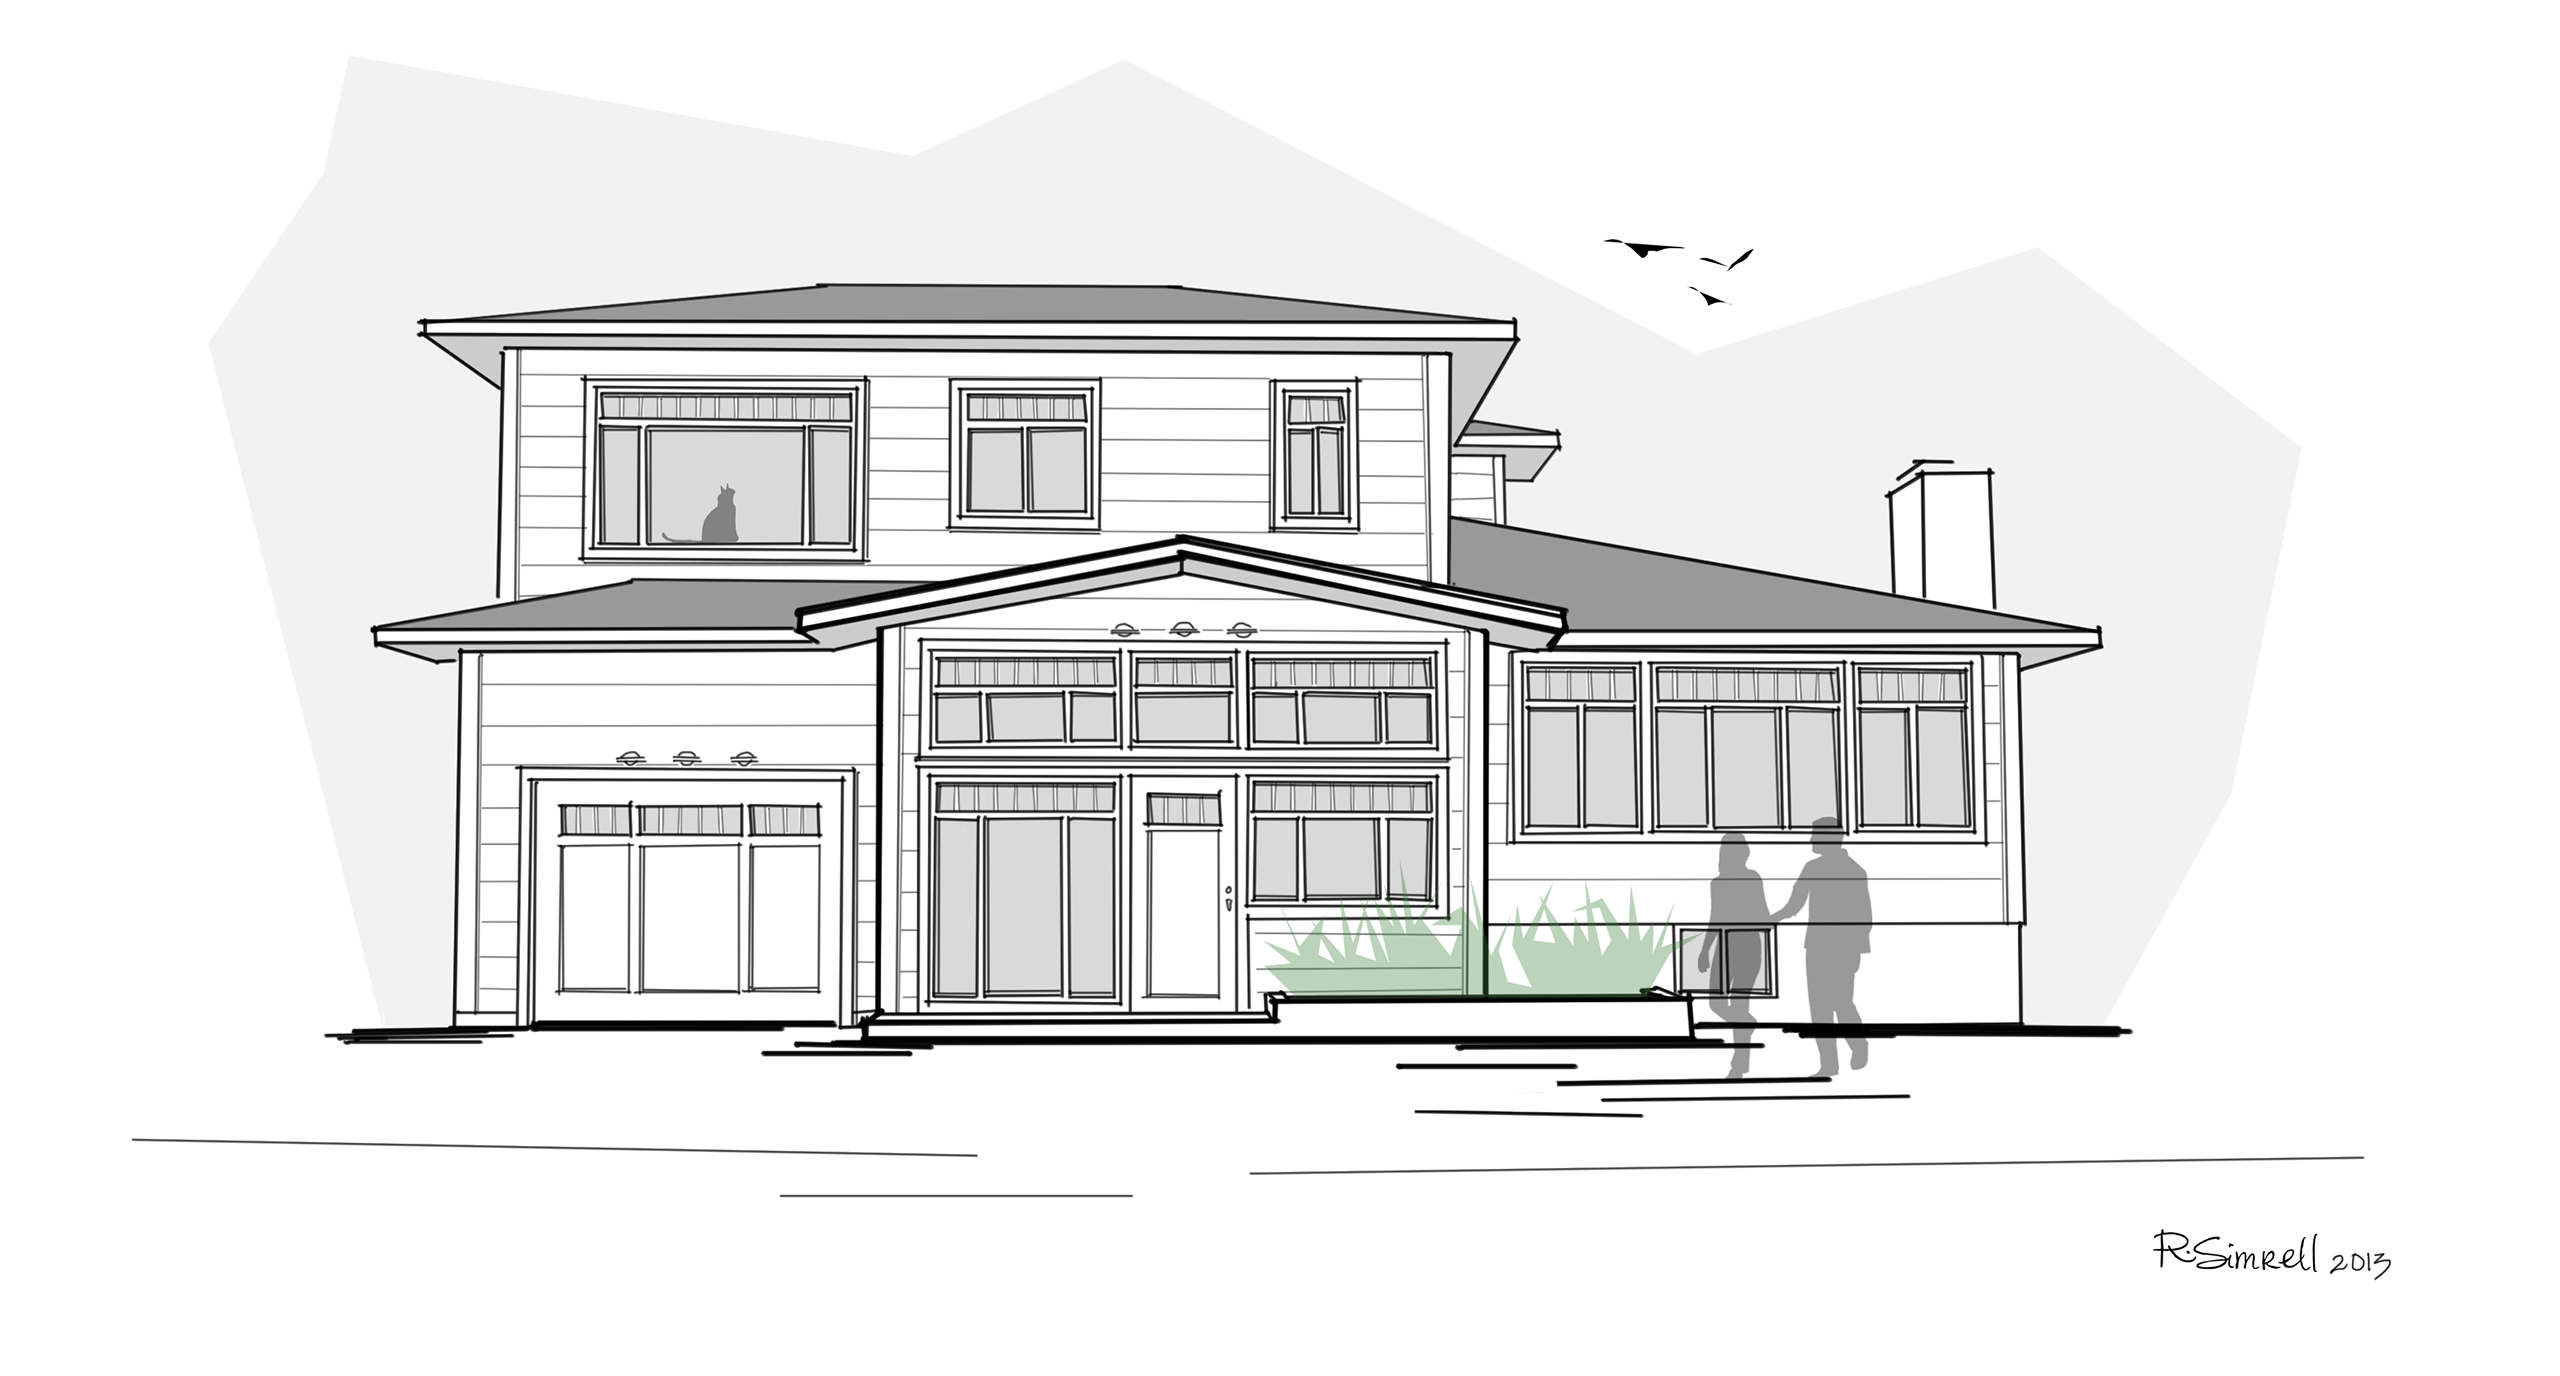 92nd Street Remodel & Addition: Early Design Sketches - Creating Balance